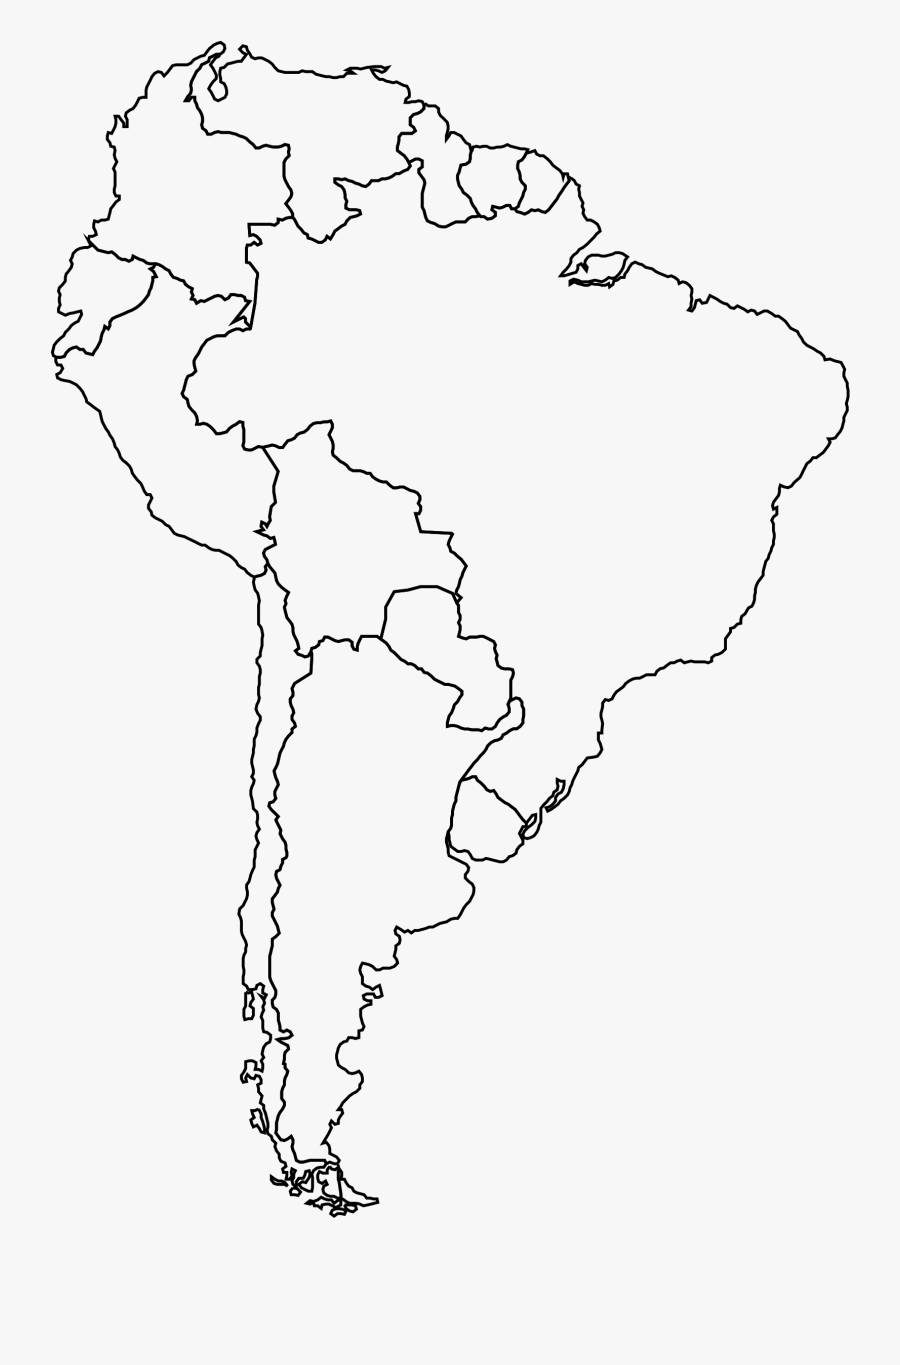 blank south america map South America Blank Map Free Transparent Clipart Clipartkey blank south america map